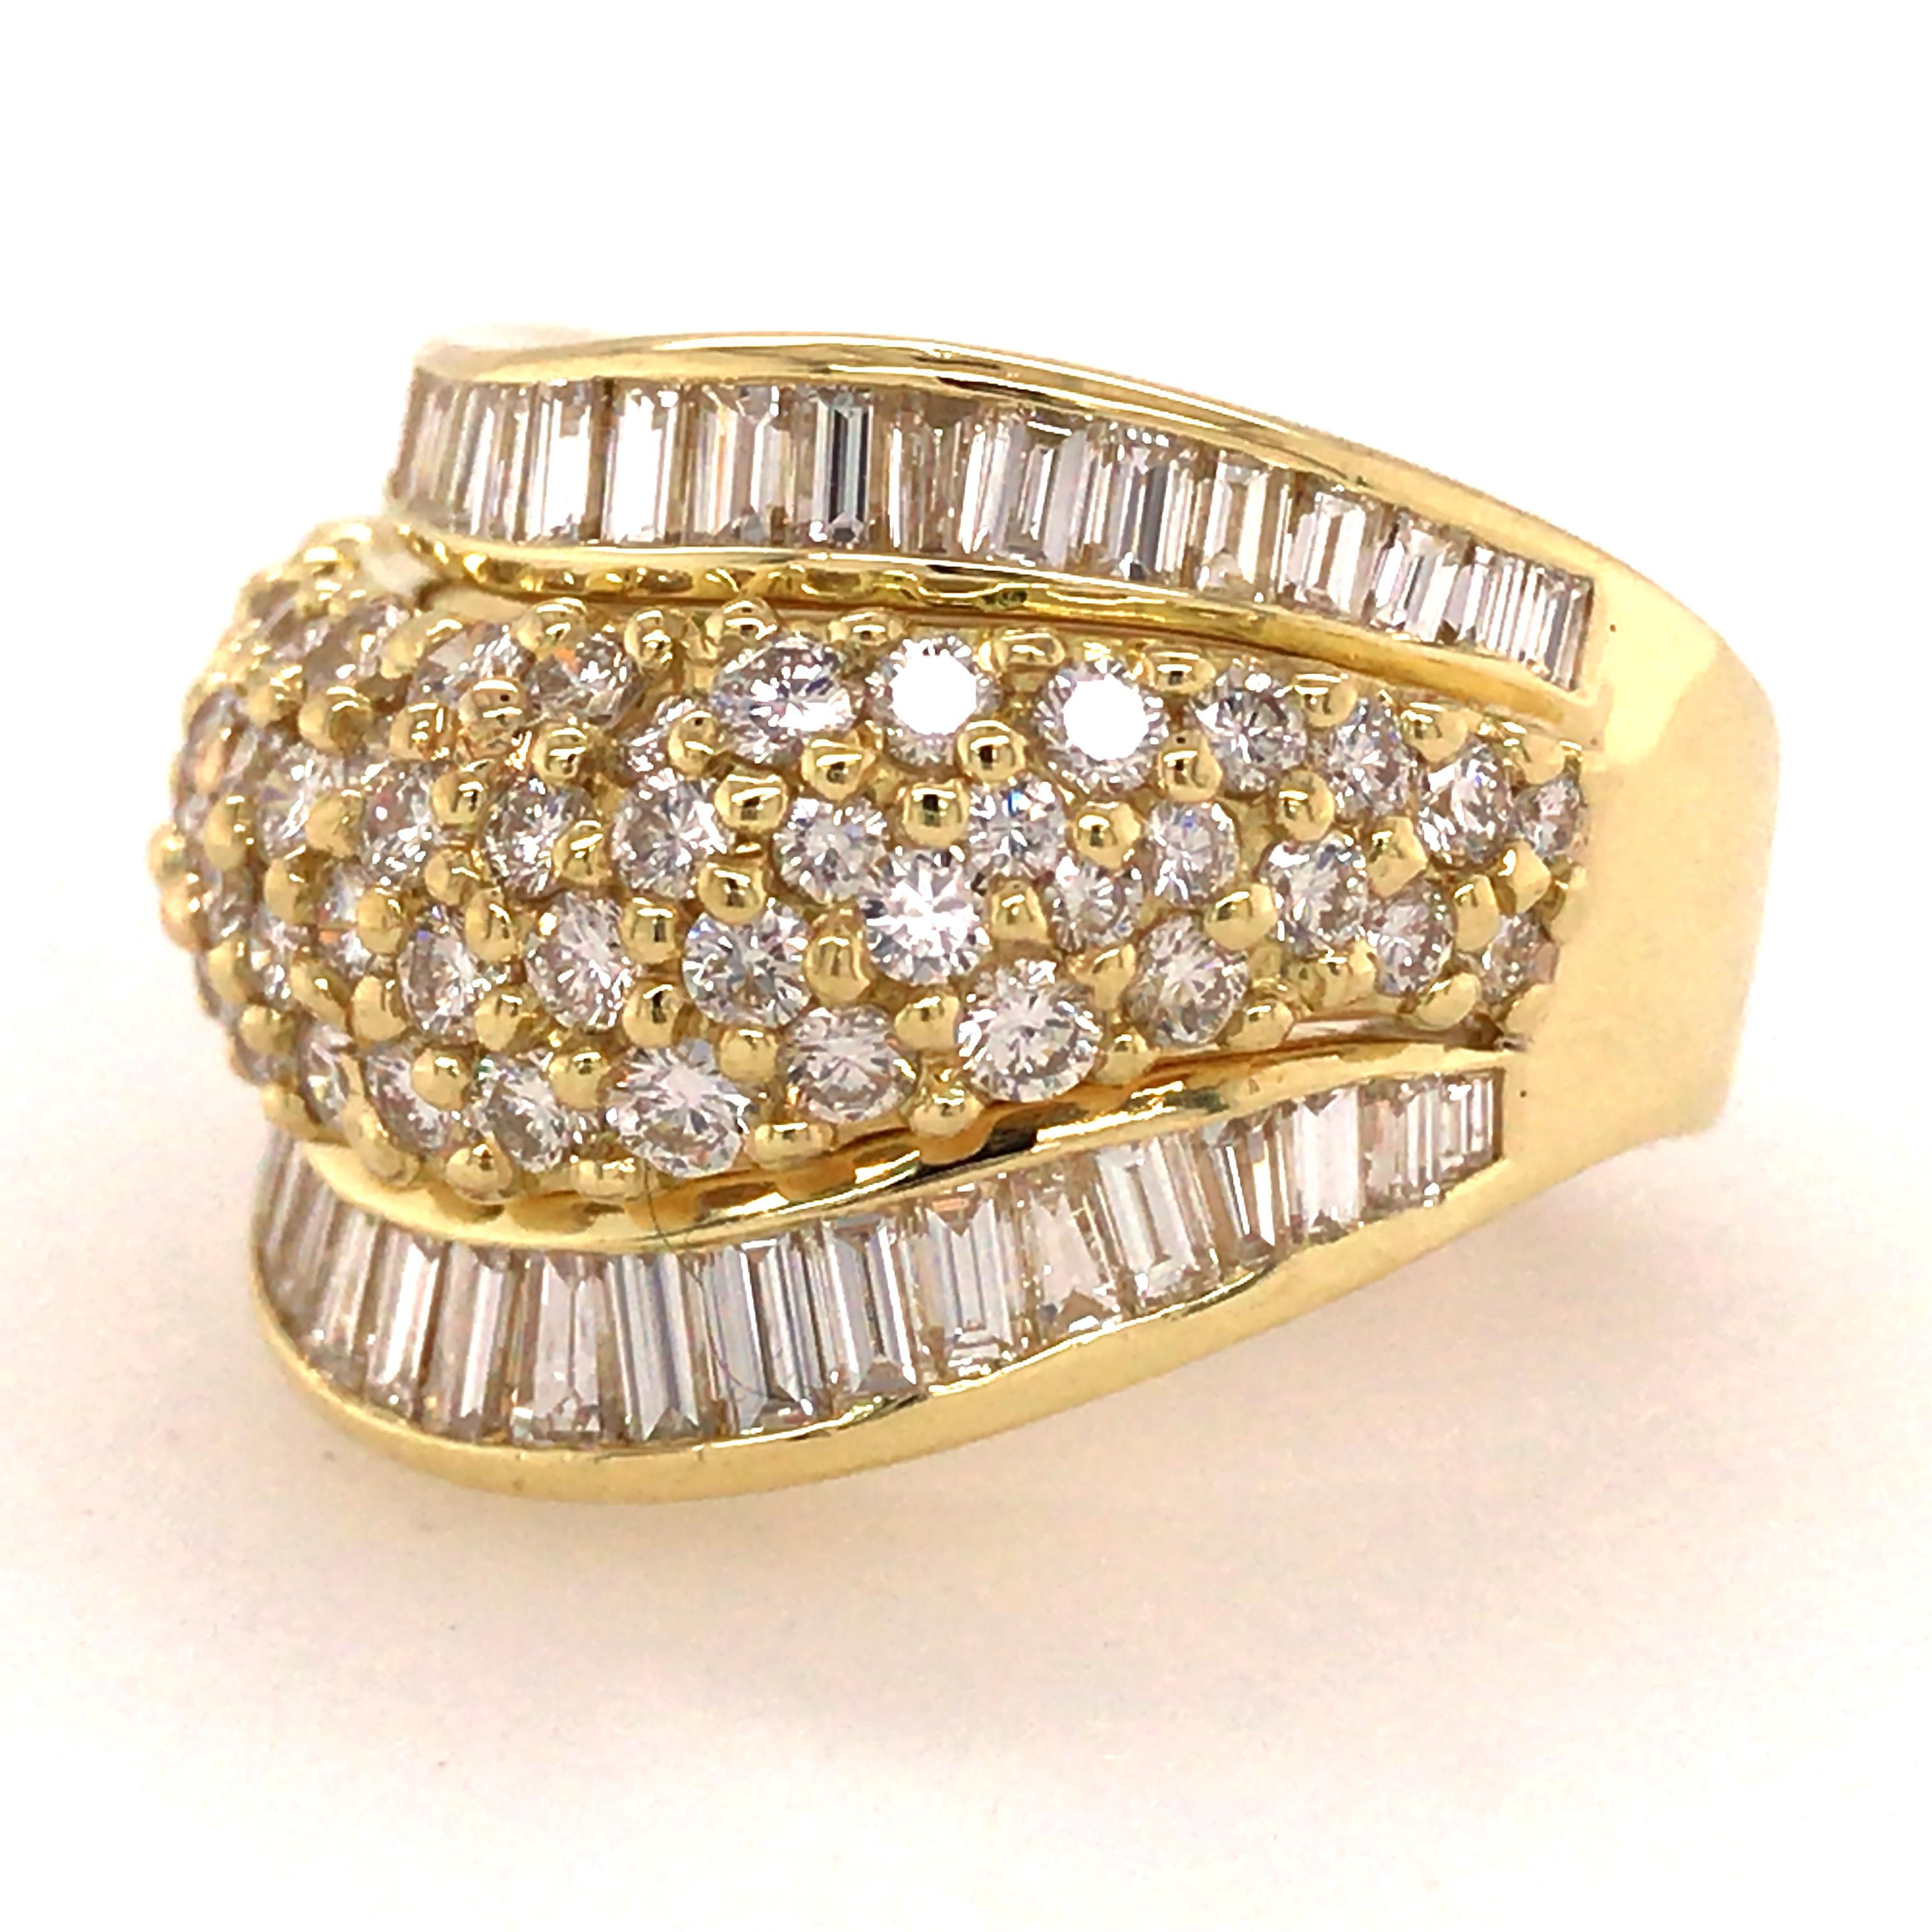 Wide Diamond Band in 18K Yellow Gold. (63) Round Brilliant Cut Diamonds weighing 1.52ct and (56) Baguette Cut Diamonds weighing 1.68ct for a total weight of 3.20 carats of D, G-H in color and VS in clarity.  The ring measures approximately 3/4 inch